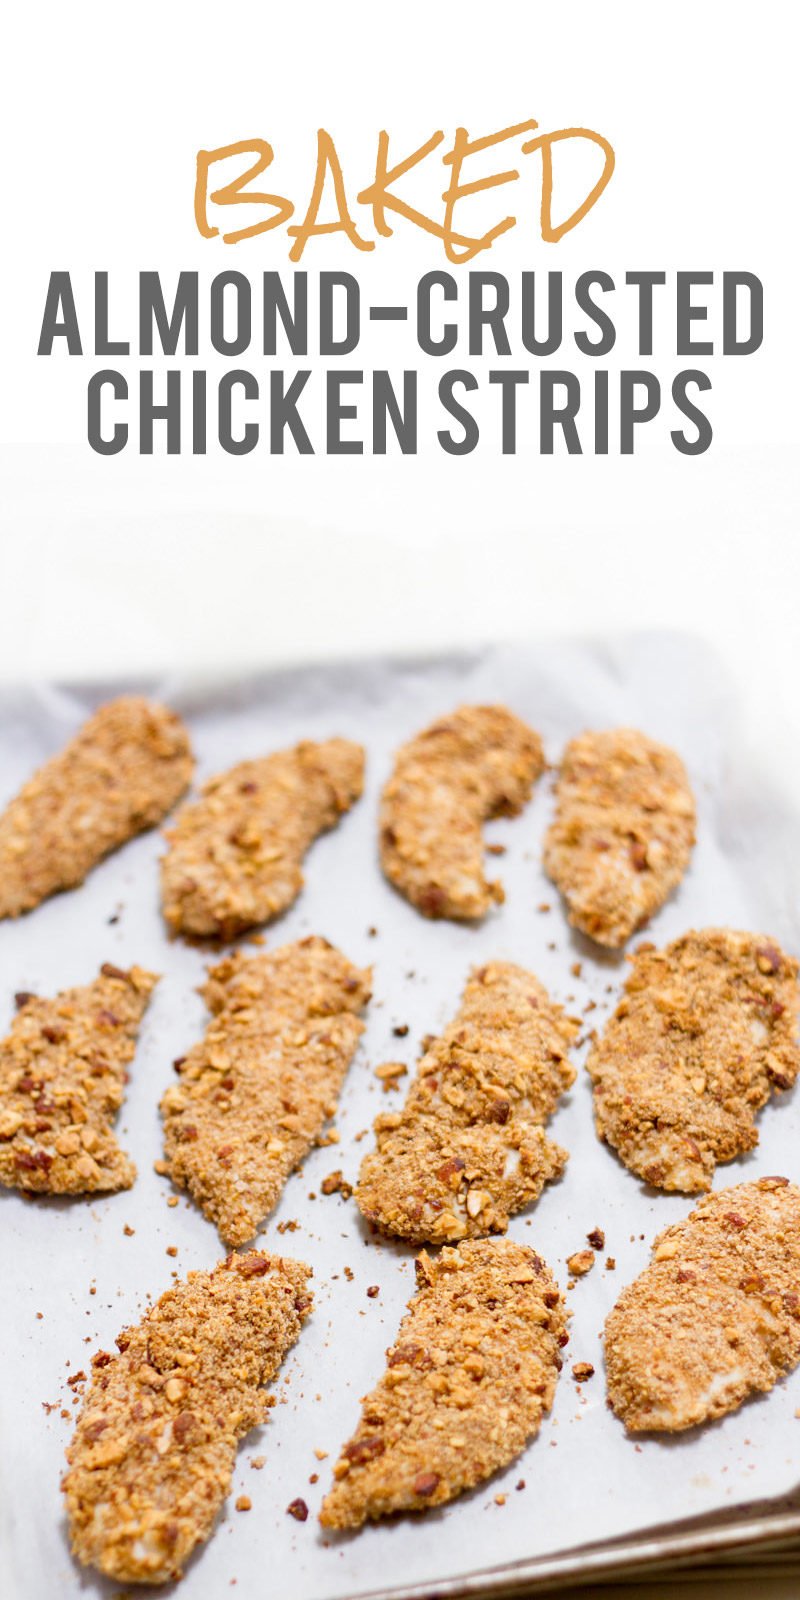 Baked Almond-Crusted Chicken Strips